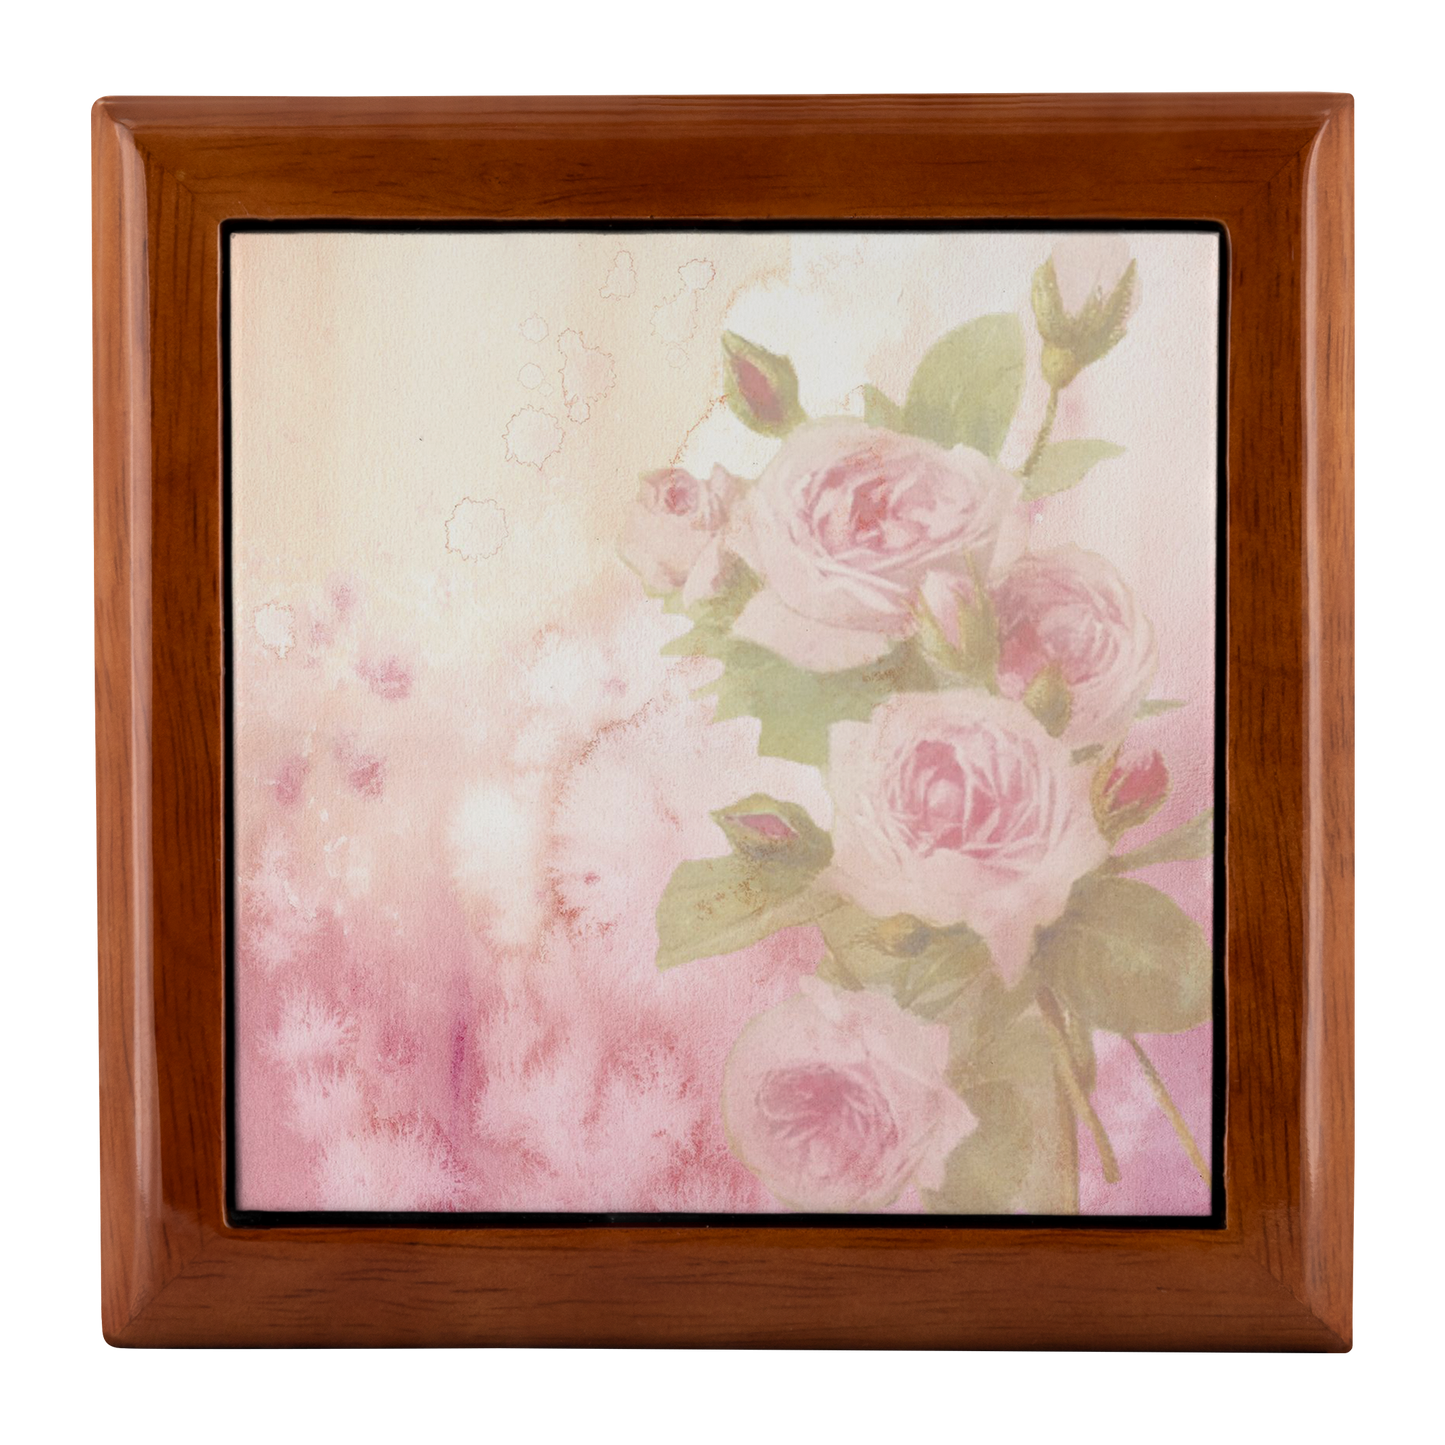 Vintage Look Pink Roses Jewelry Box - Schoppix Gifts